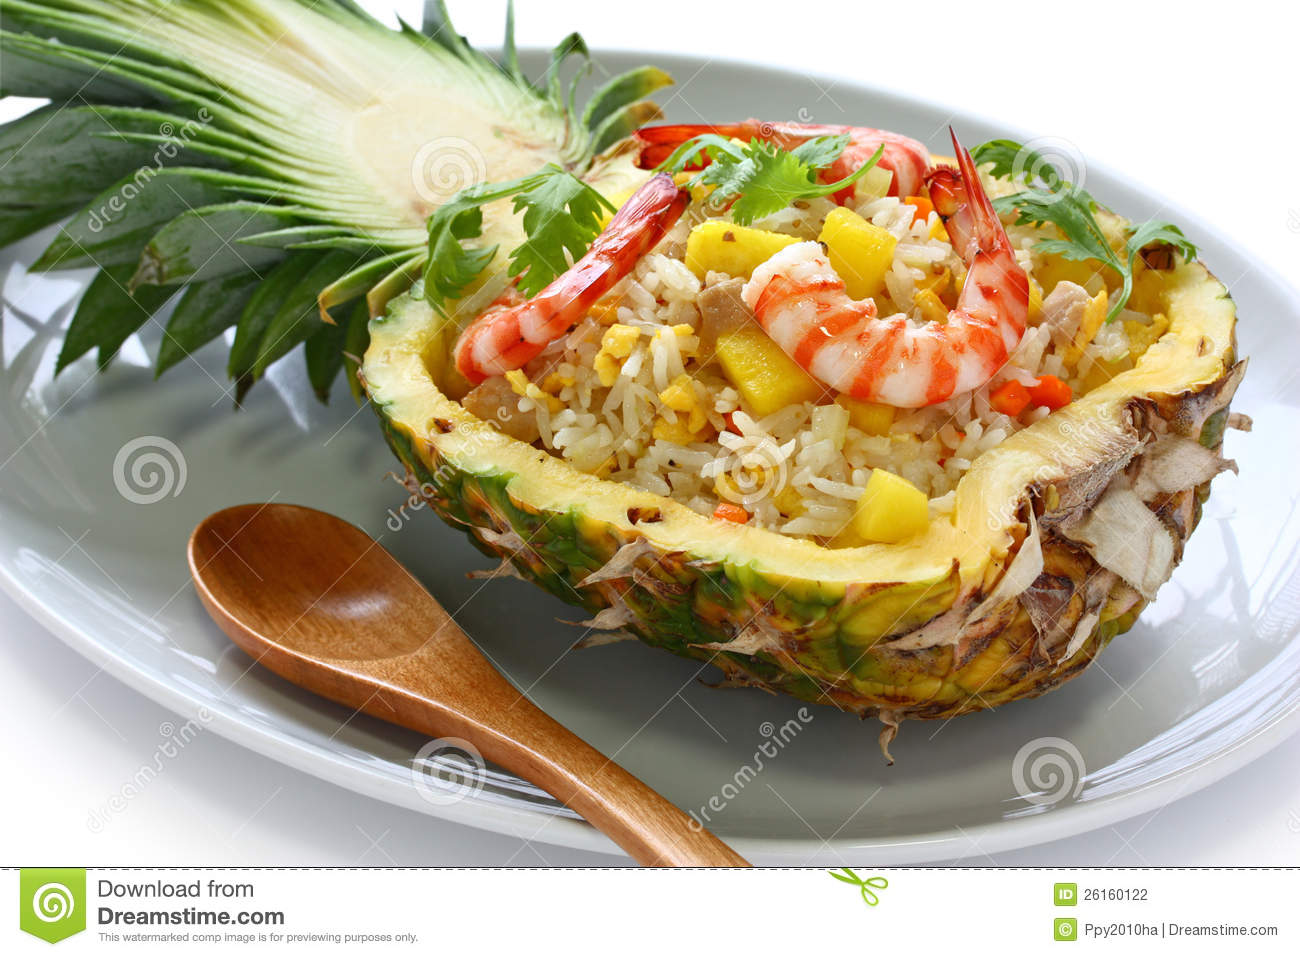 Pineapple Fried Rice Stock Photography   Image  26160122